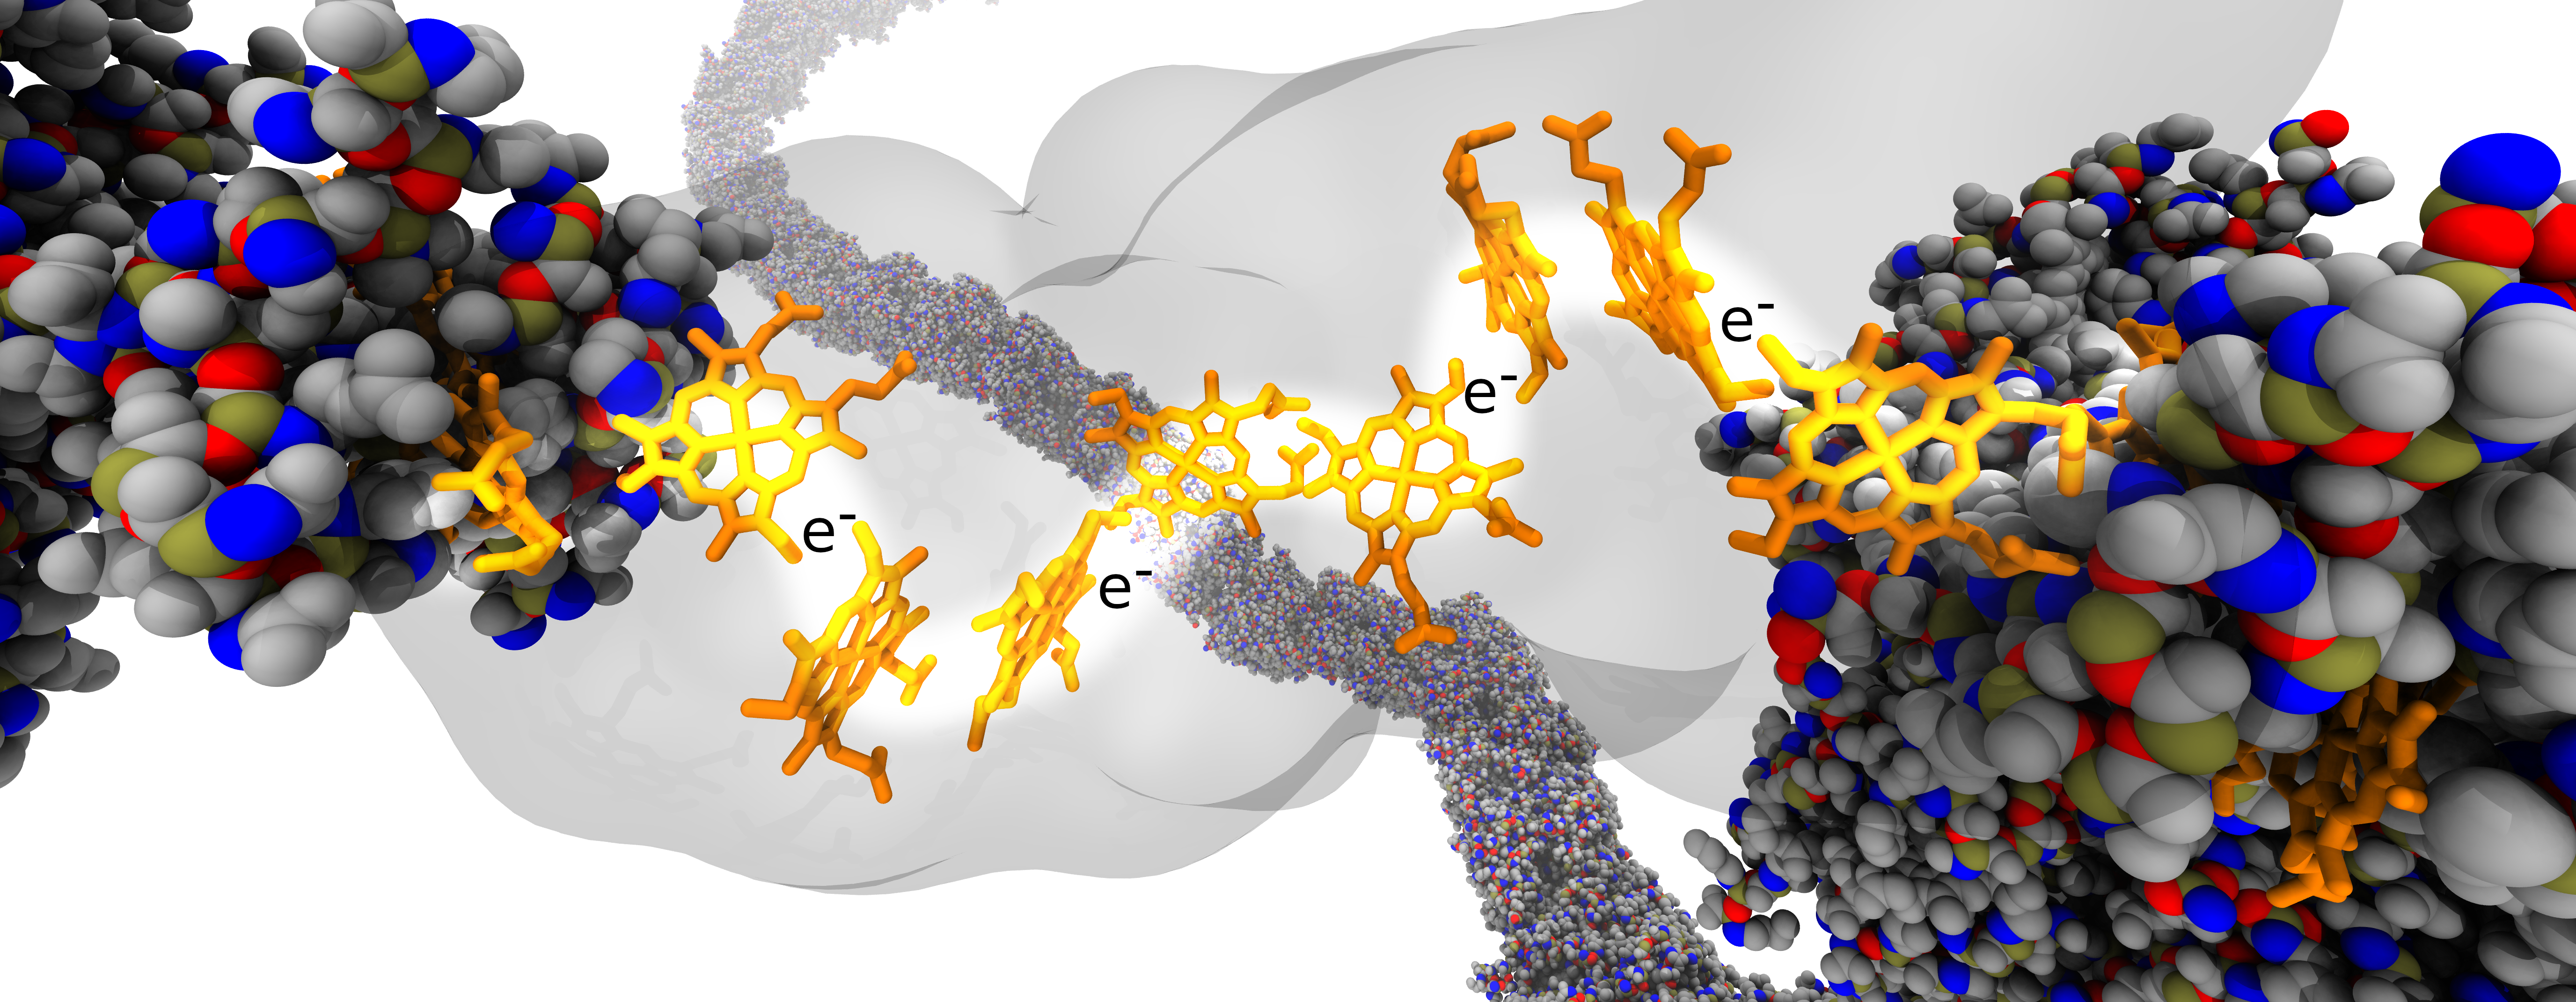 A computer rendering of proteins and wires